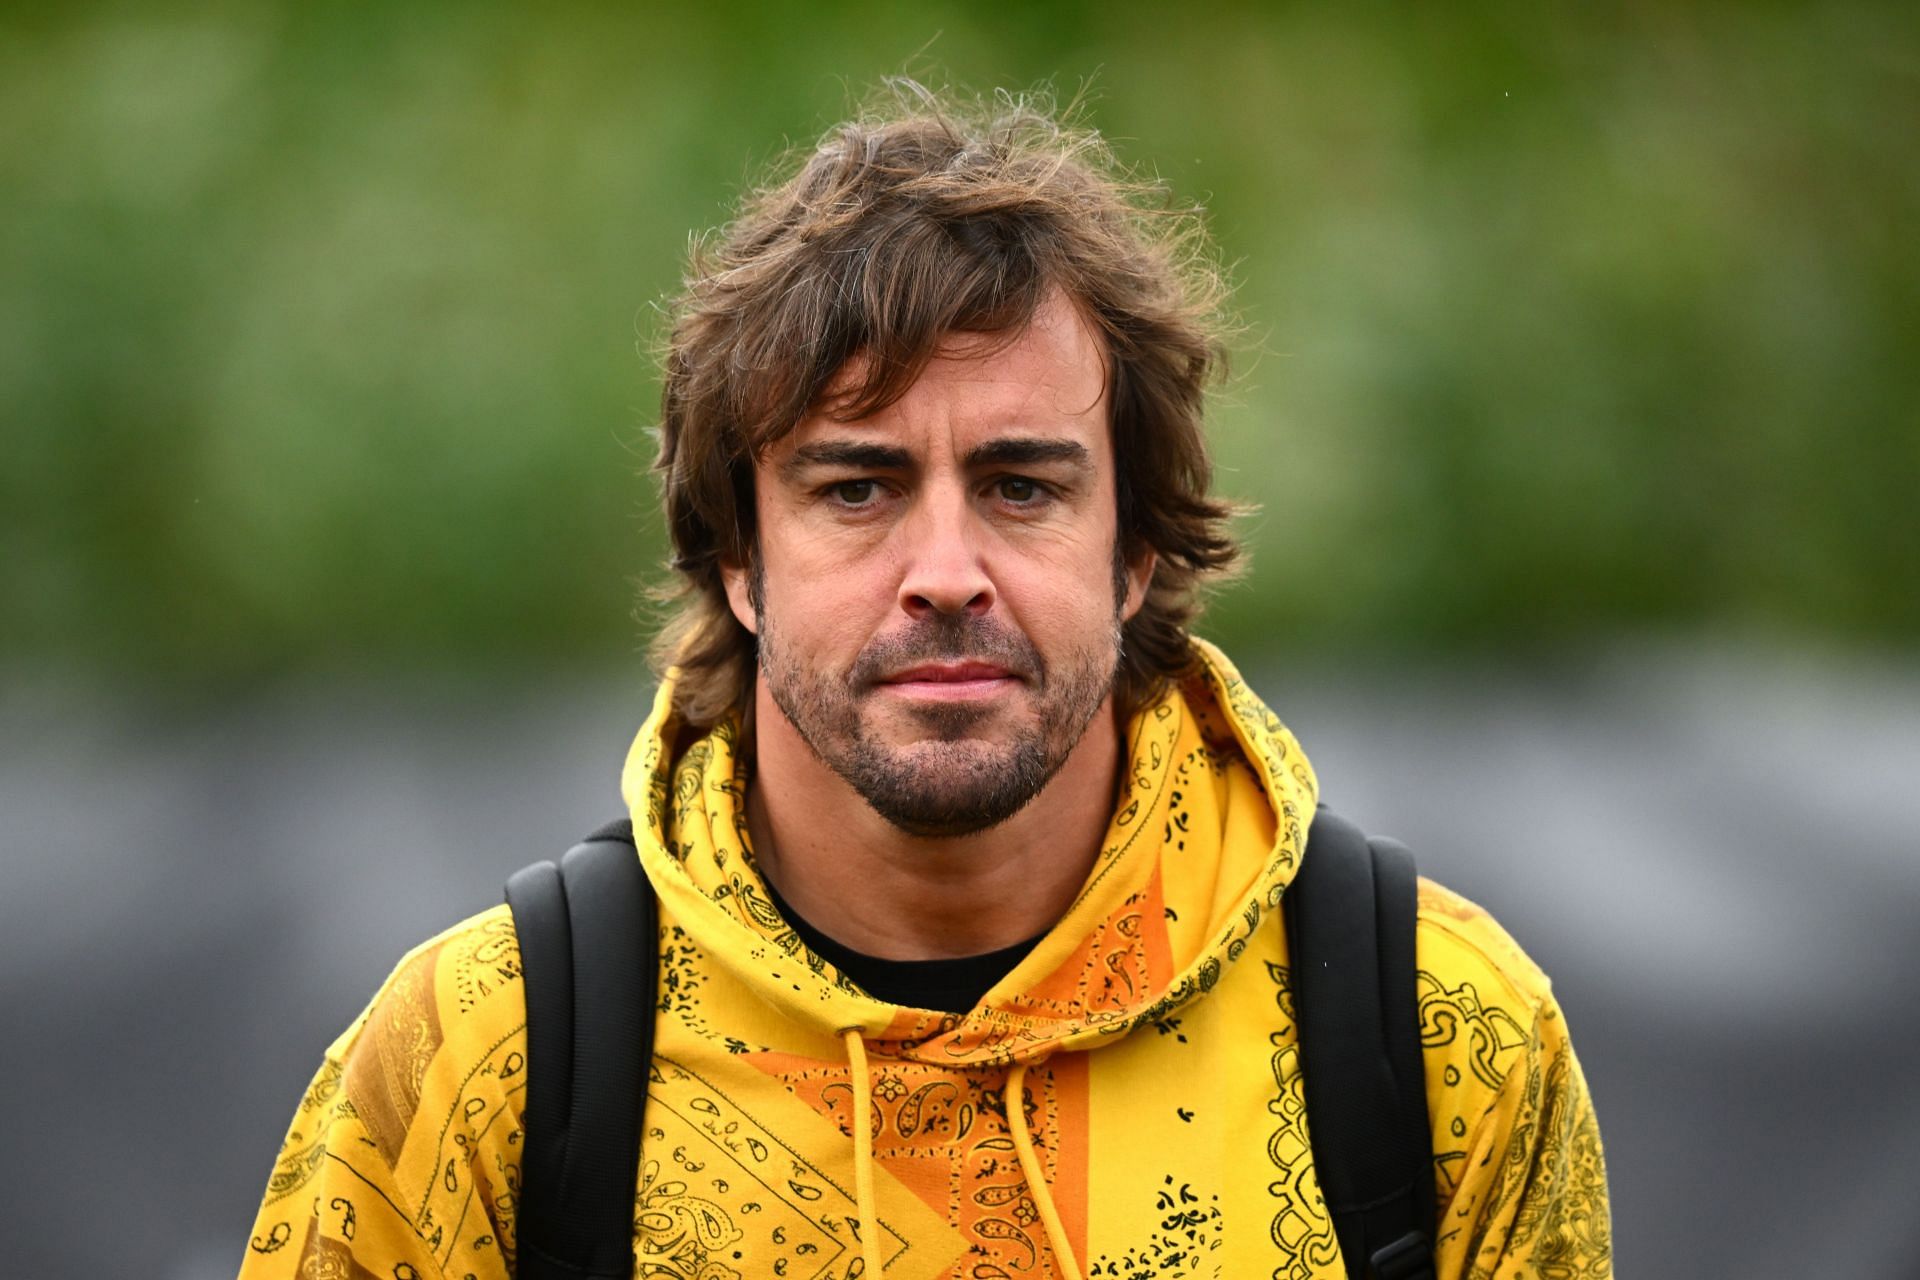 Fernando Alonso arrives in the Paddock ahead of the 2022 Imola GP. (Photo by Clive Mason/Getty Images)